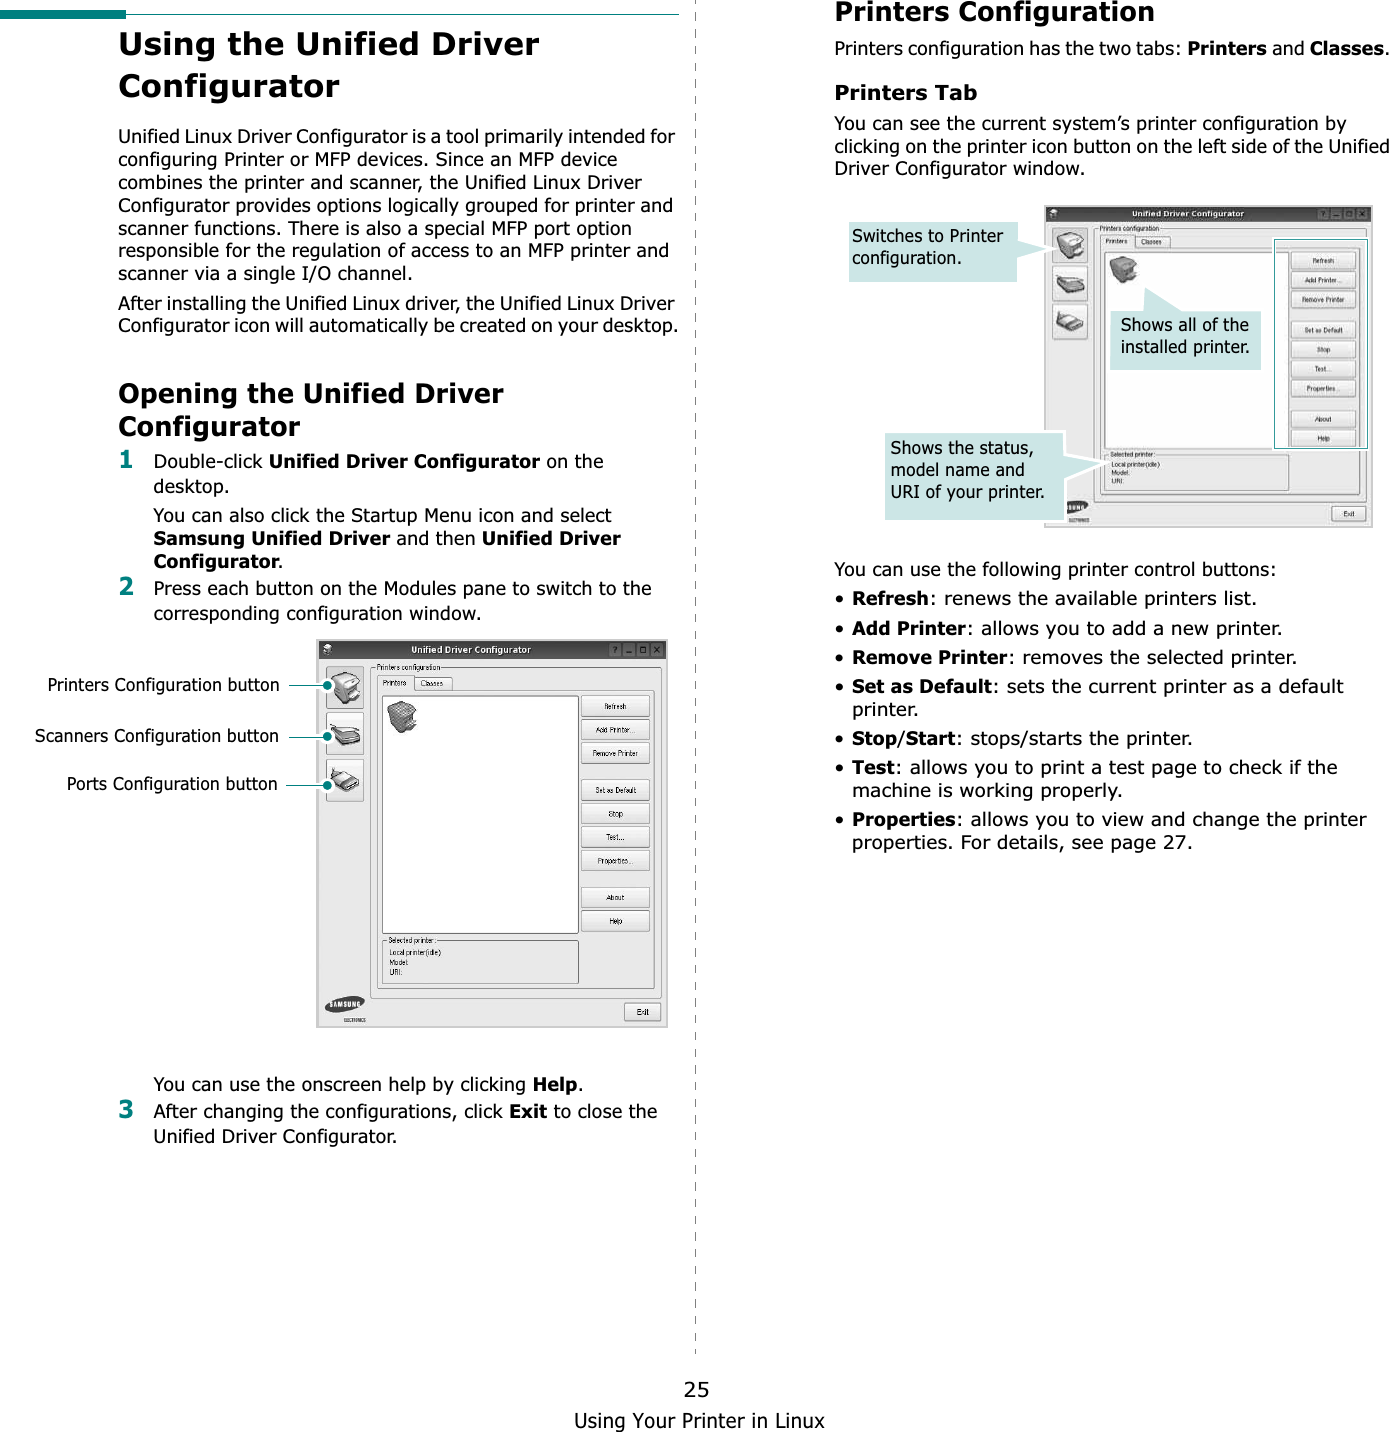 Using Your Printer in Linux25Using the Unified Driver ConfiguratorUnified Linux Driver Configurator is a tool primarily intended for configuring Printer or MFP devices. Since an MFP device combines the printer and scanner, the Unified Linux Driver Configurator provides options logically grouped for printer and scanner functions. There is also a special MFP port option responsible for the regulation of access to an MFP printer and scanner via a single I/O channel.After installing the Unified Linux driver, the Unified Linux Driver Configurator icon will automatically be created on your desktop.Opening the Unified Driver Configurator1Double-click Unified Driver Configurator on the desktop.You can also click the Startup Menu icon and select Samsung Unified Driver and then Unified Driver Configurator.2Press each button on the Modules pane to switch to the corresponding configuration window.   You can use the onscreen help by clicking Help.3After changing the configurations, click Exit to close the Unified Driver Configurator.Printers Configuration buttonScanners Configuration buttonPorts Configuration buttonPrinters ConfigurationPrinters configuration has the two tabs: Printers and Classes.Printers TabYou can see the current system’s printer configuration by clicking on the printer icon button on the left side of the Unified Driver Configurator window.You can use the following printer control buttons:•Refresh: renews the available printers list.•Add Printer: allows you to add a new printer.•Remove Printer: removes the selected printer.•Set as Default: sets the current printer as a default printer.•Stop/Start: stops/starts the printer.•Test: allows you to print a test page to check if the machine is working properly.•Properties: allows you to view and change the printer properties. For details, see page 27.Shows all of the installed printer.Switches to Printer configuration.Shows the status, model name and URI of your printer.